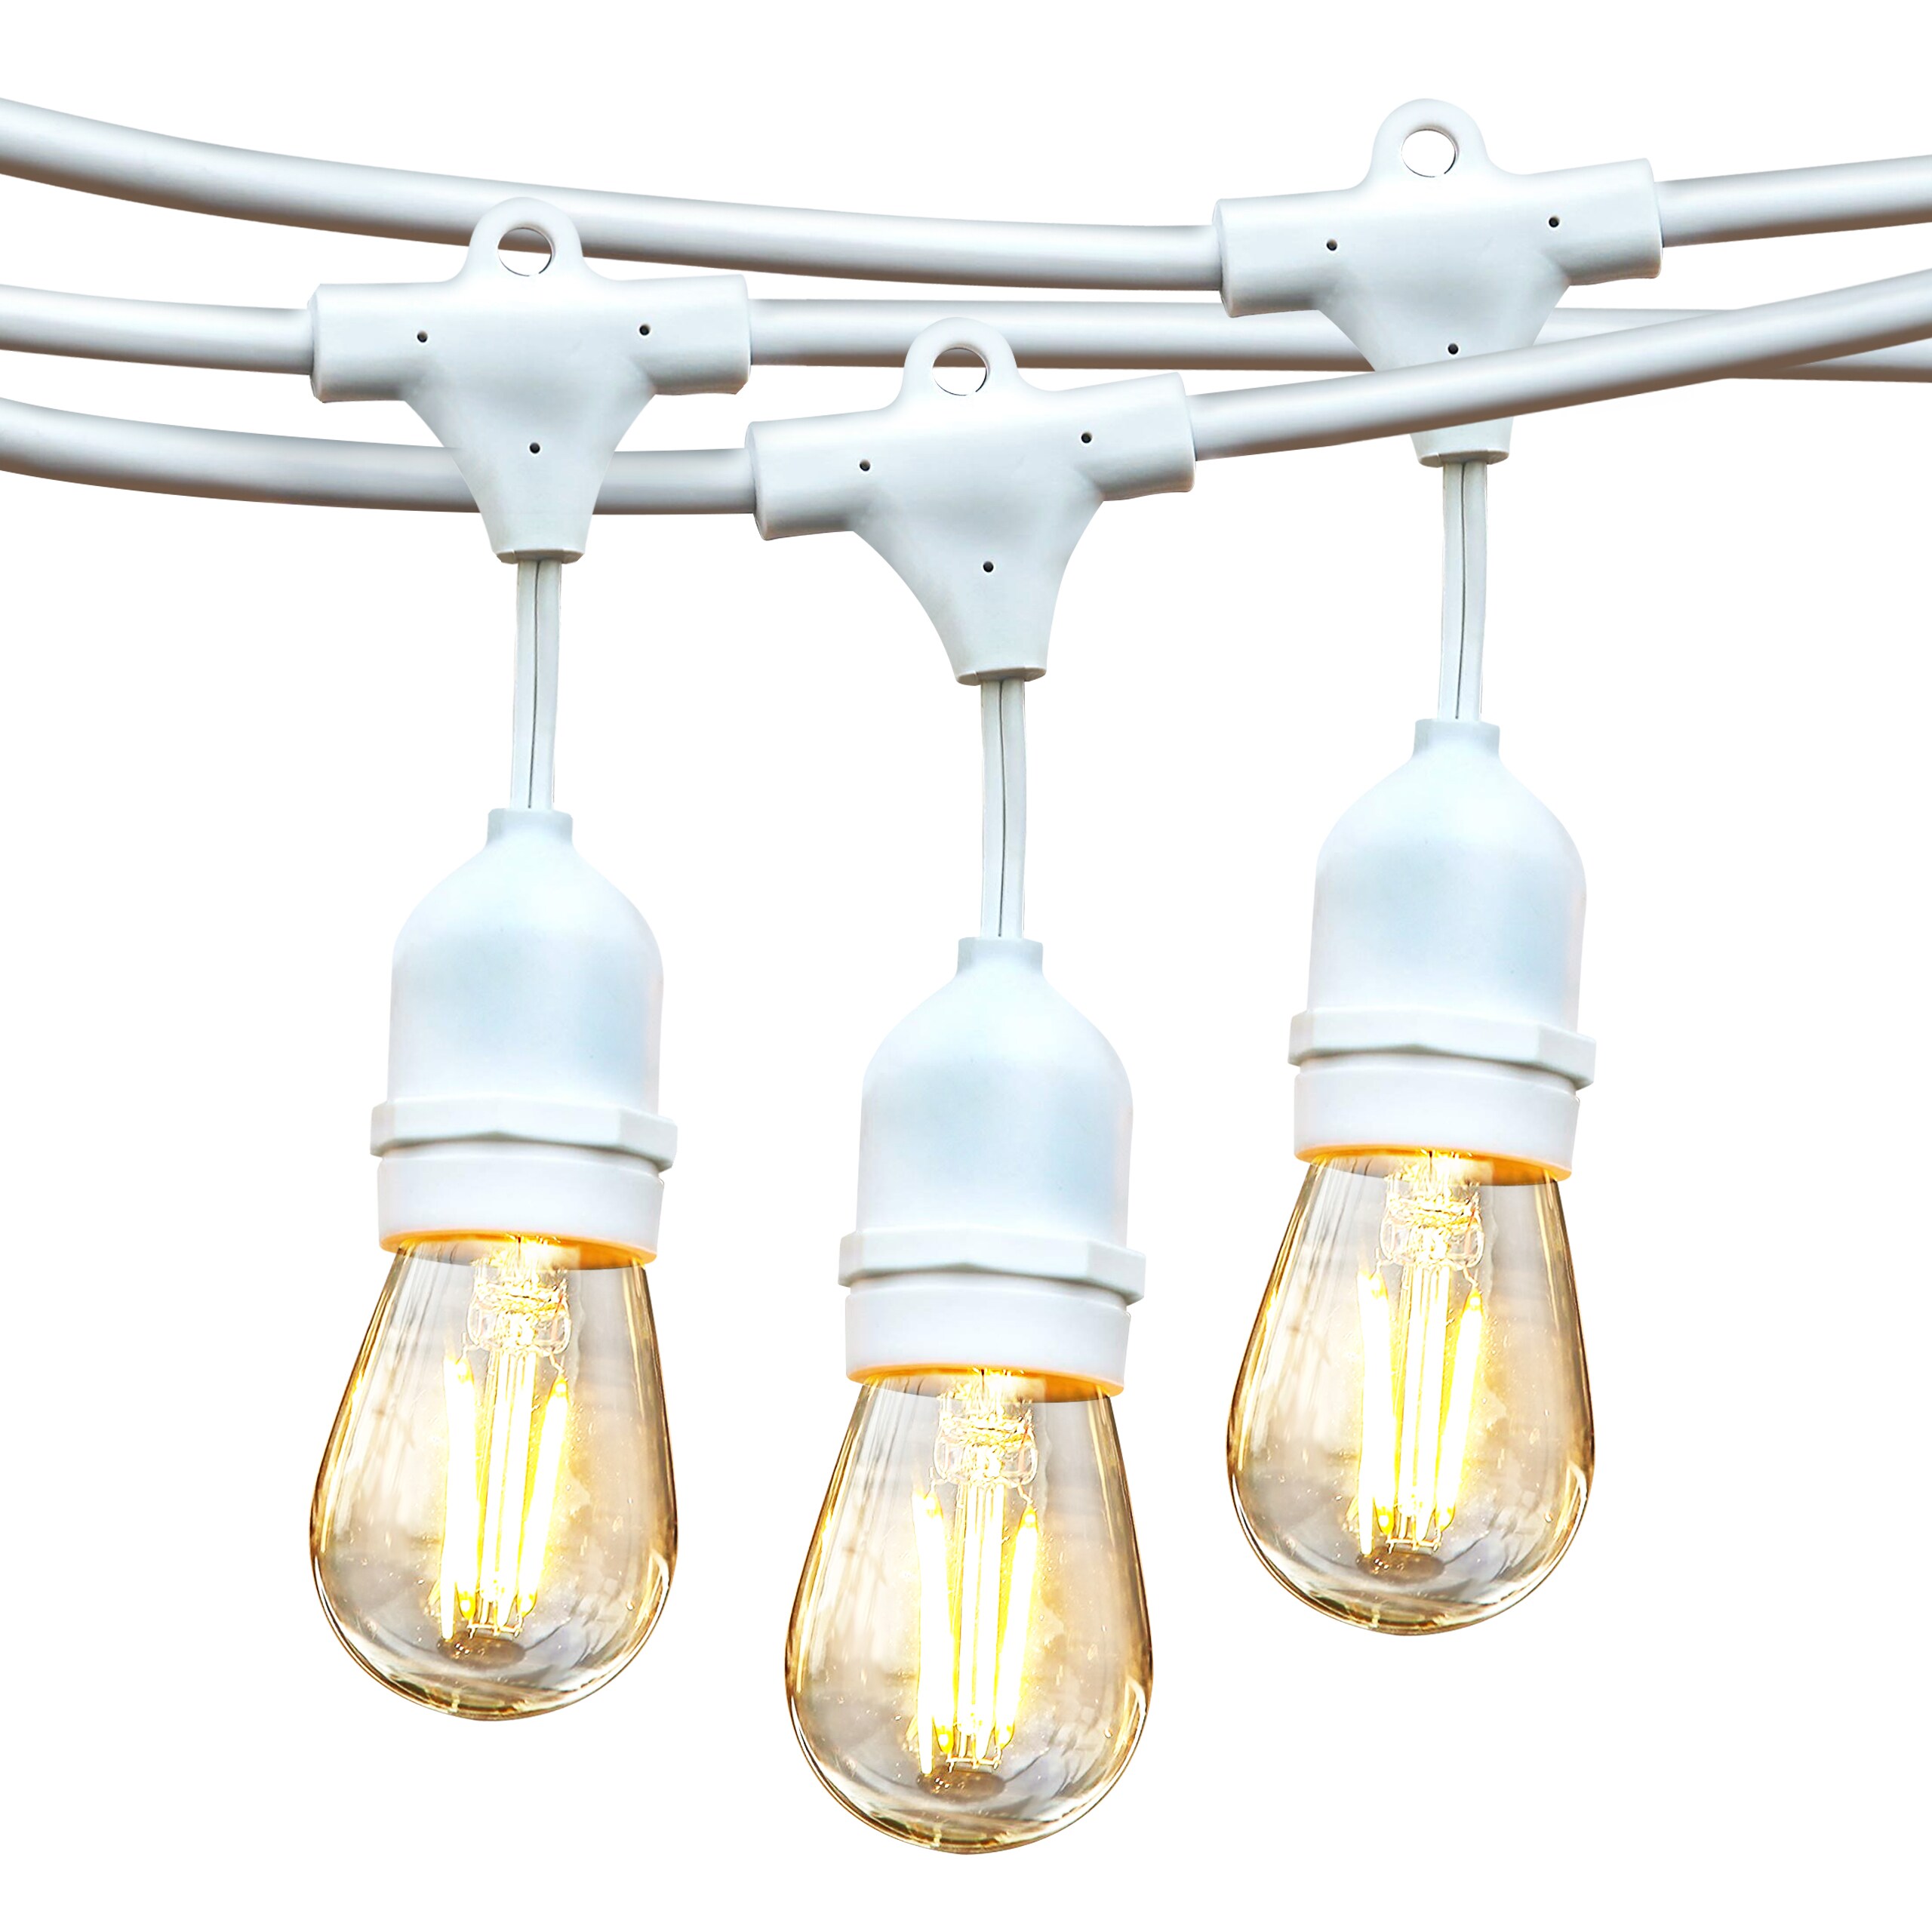 Glass Edison Bulbs 15 Hanging Sockets Dimmable for sale online Outdoor String Lights 48 FT 